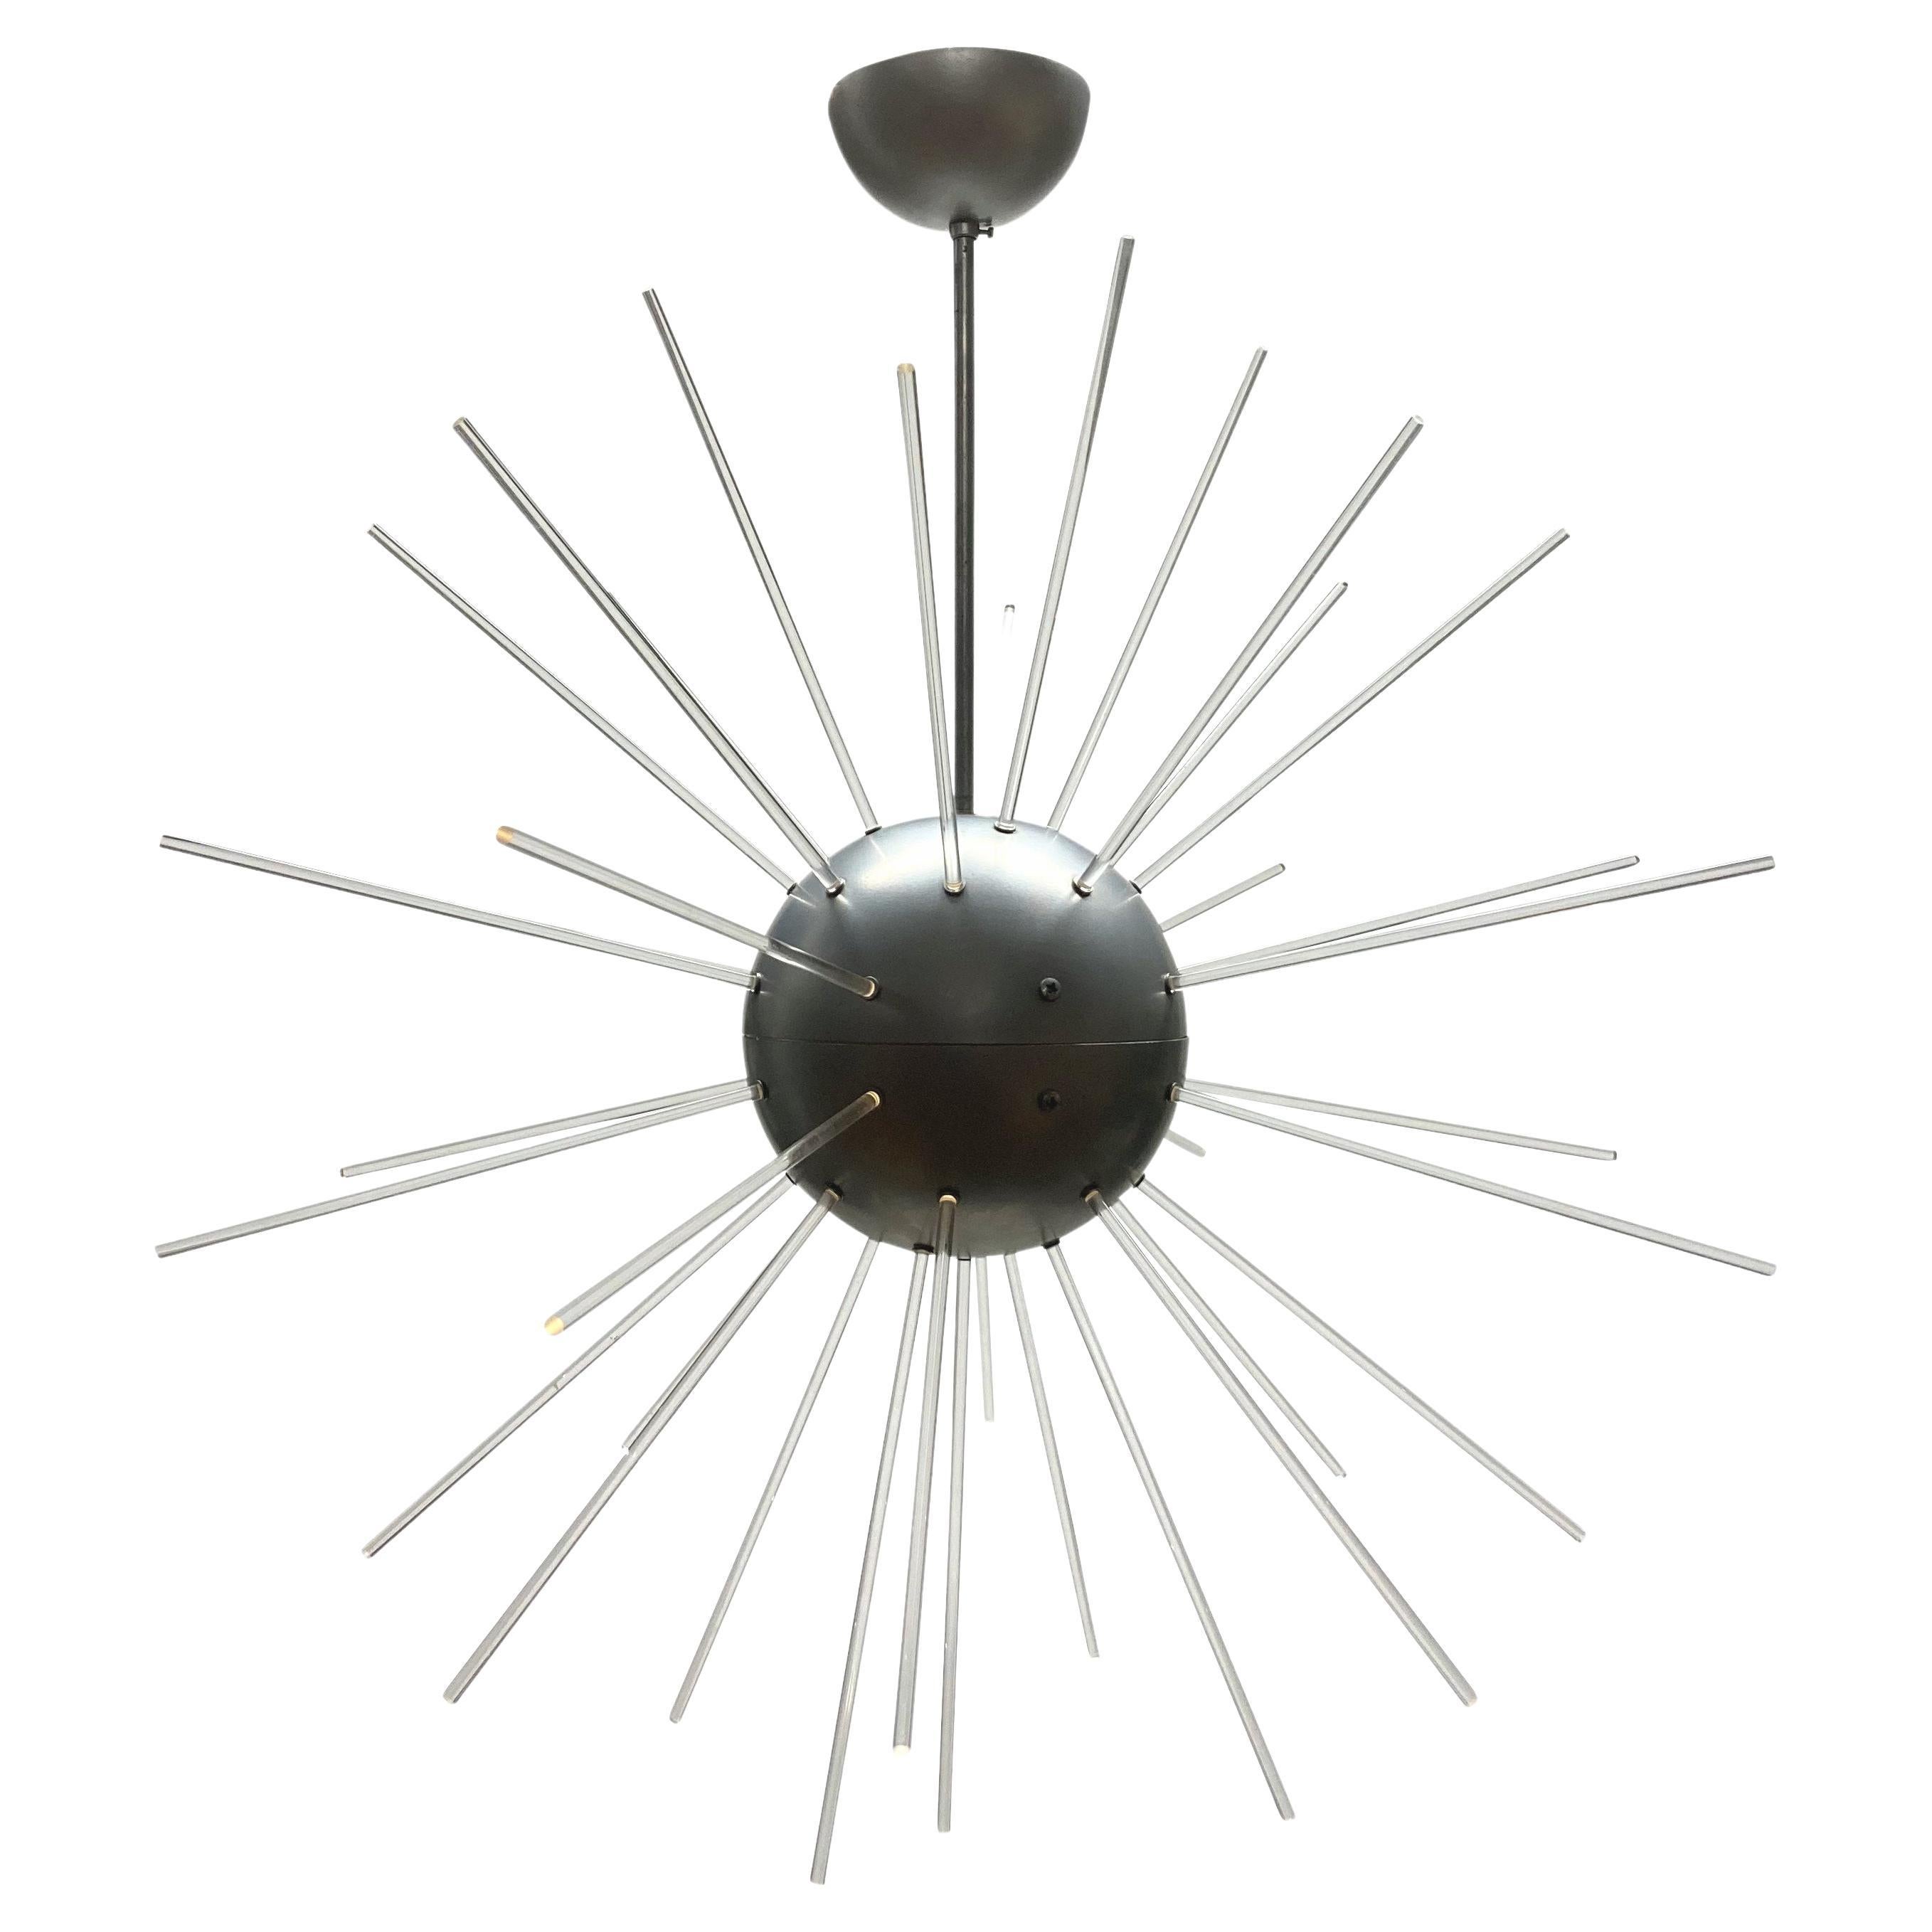 Rare Pendant Light from the Collection I Soli Alchimea, by Alessandro Guerriero